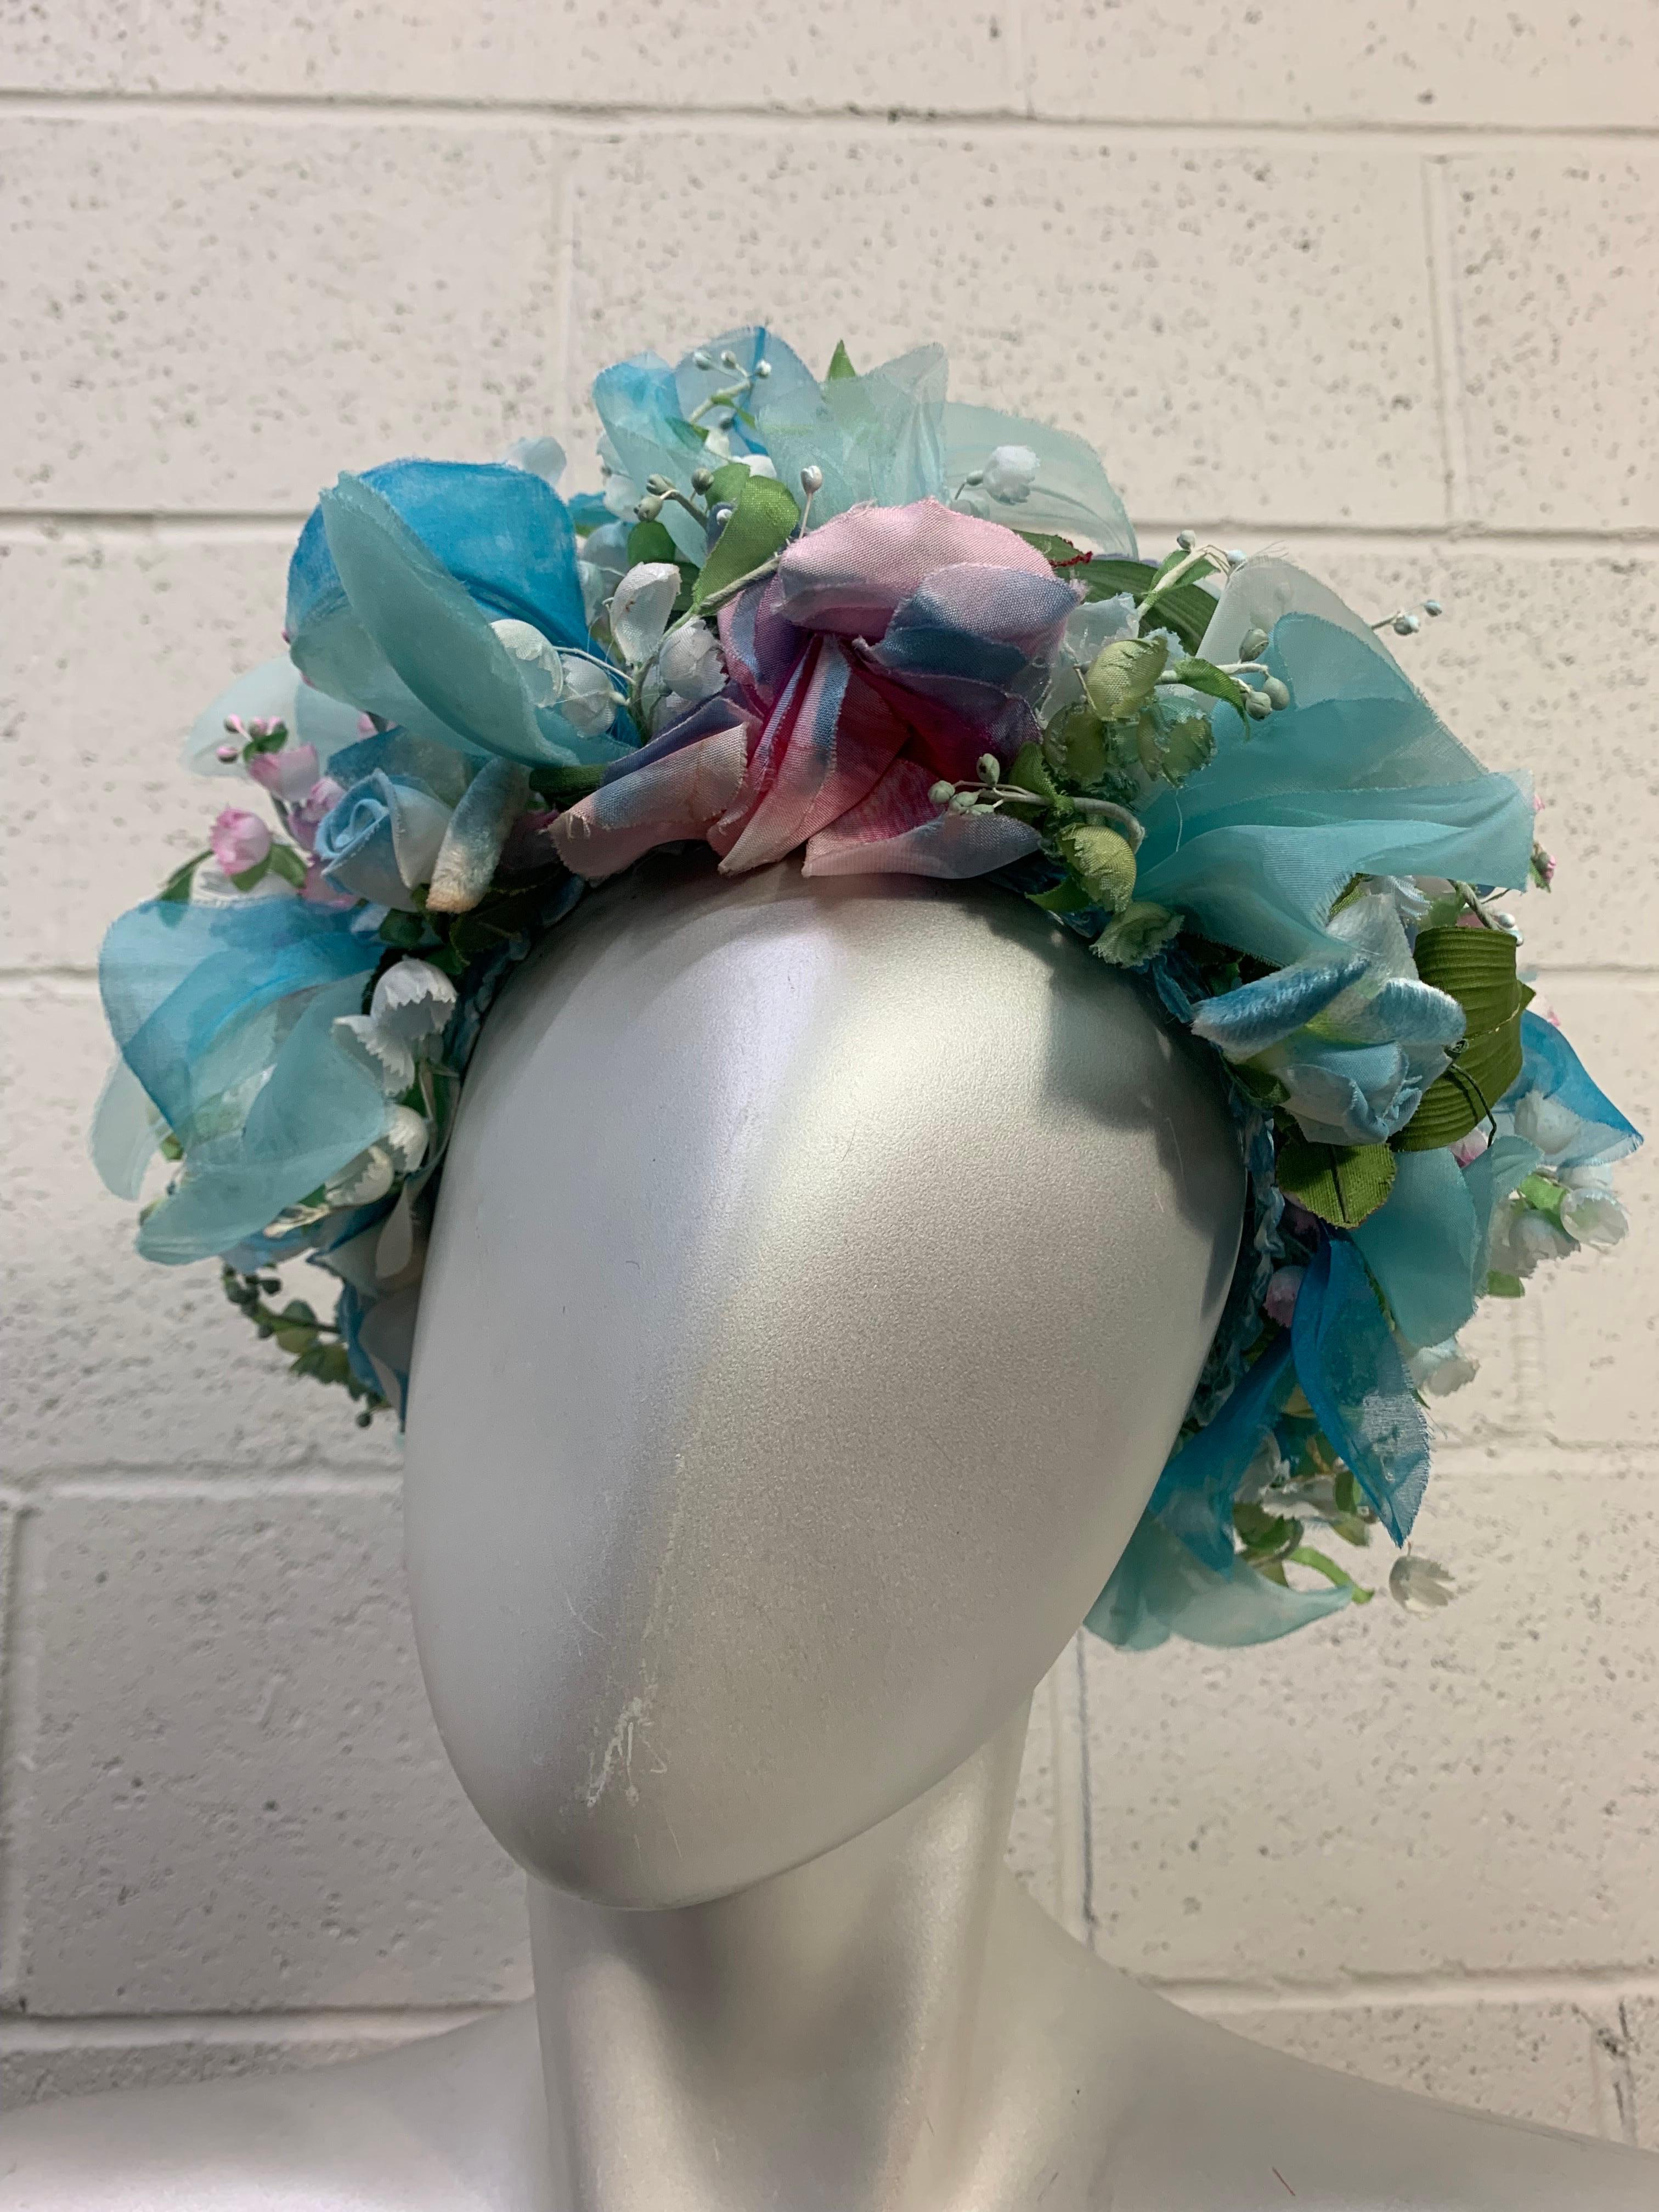 1960s Christian Dior Spectacular Floral Wreath / Turban Hat Turquoise & Purples For Sale 4